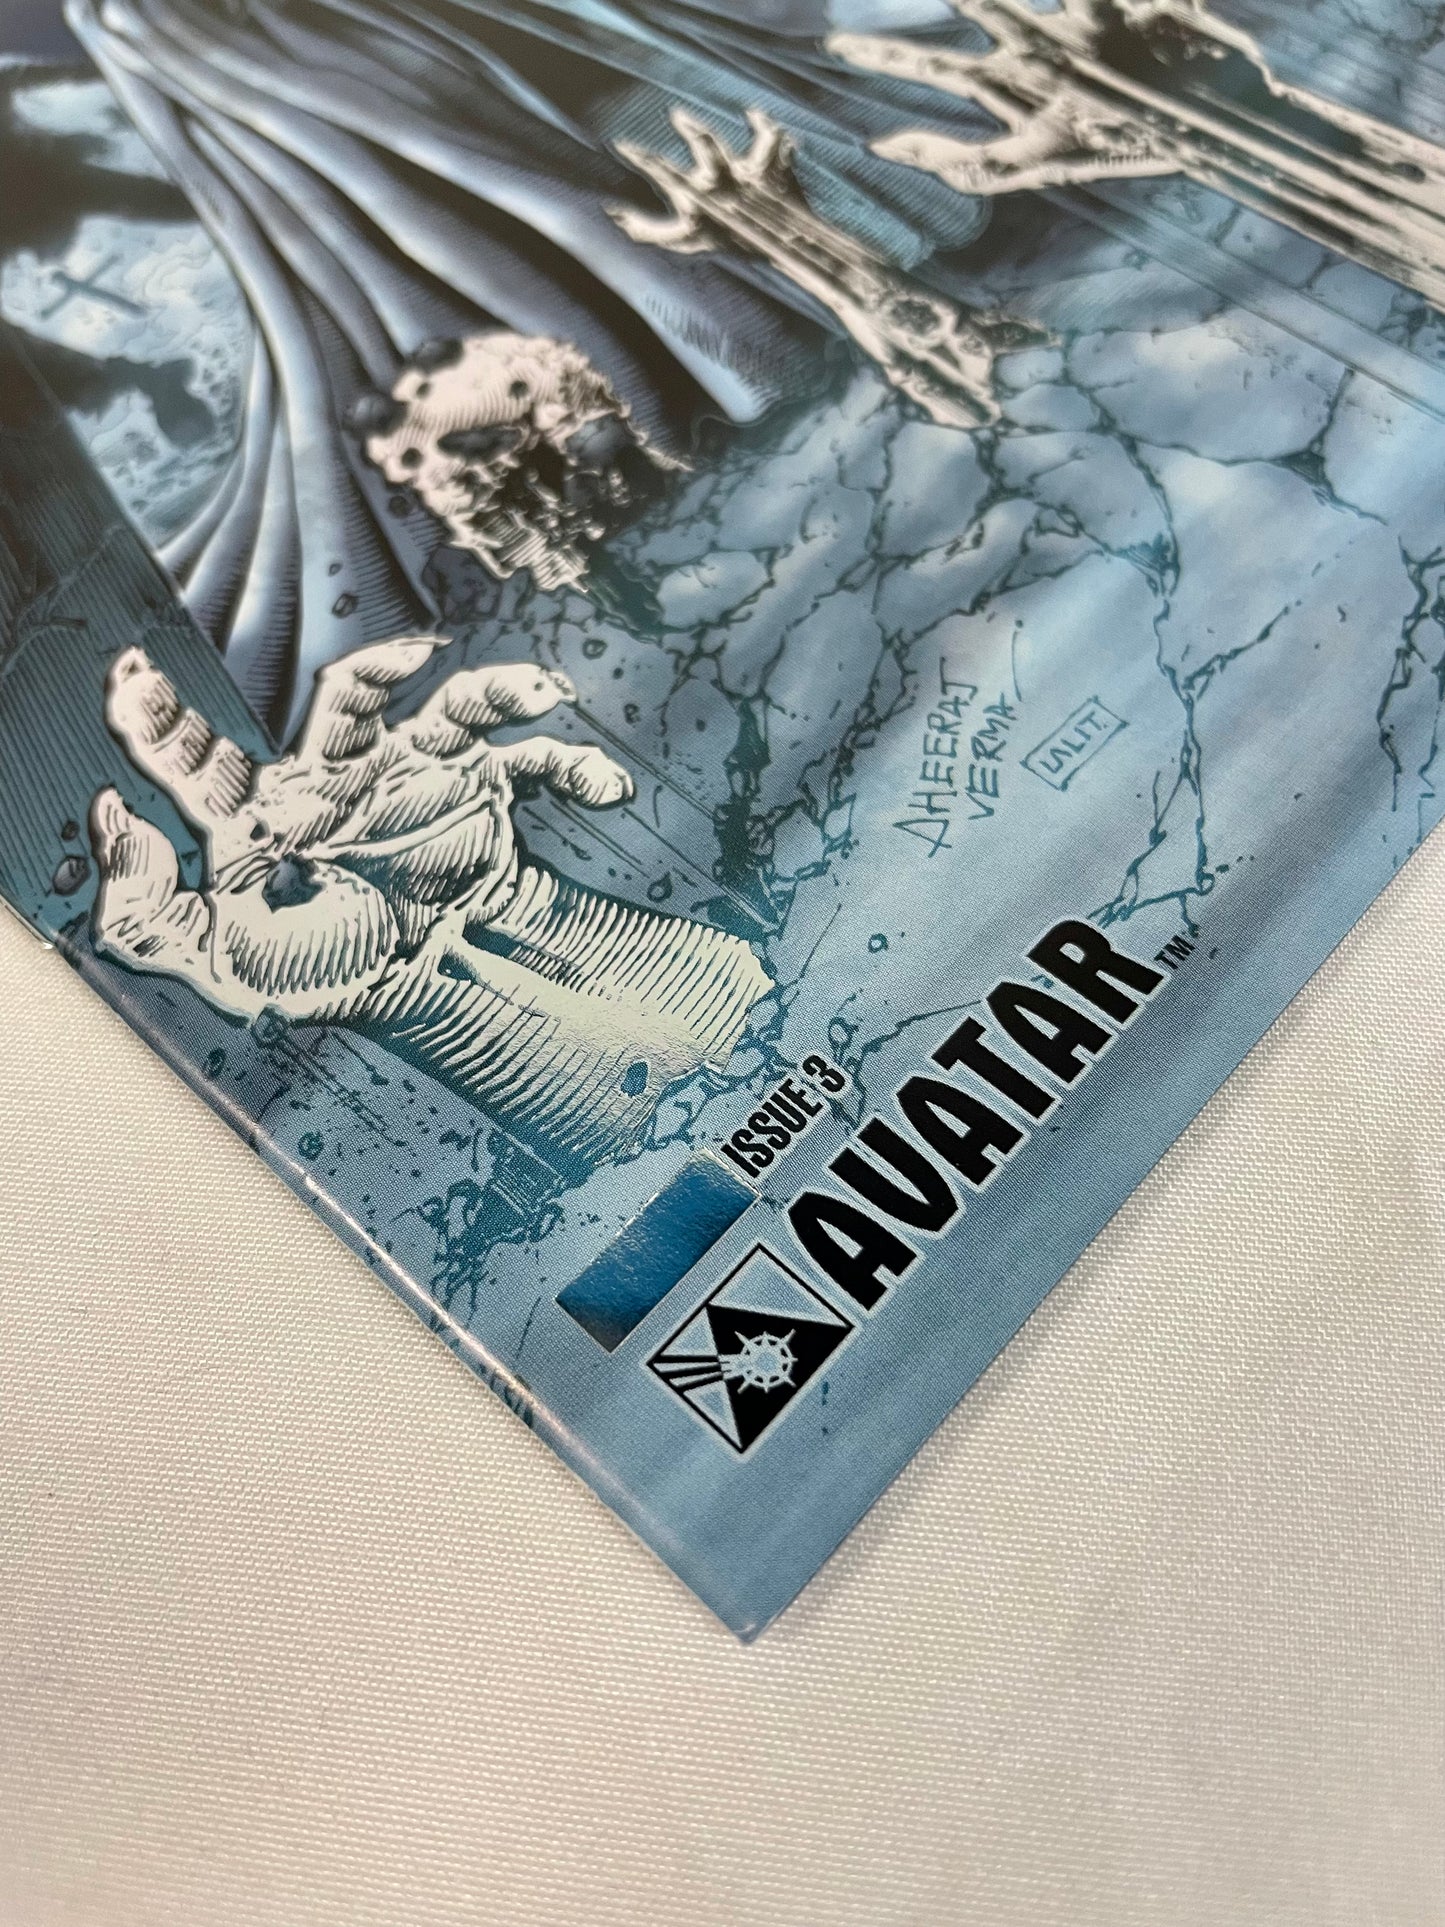 Avatar Comics Escape of the Living Dead Issue 3 (Foil Cover)